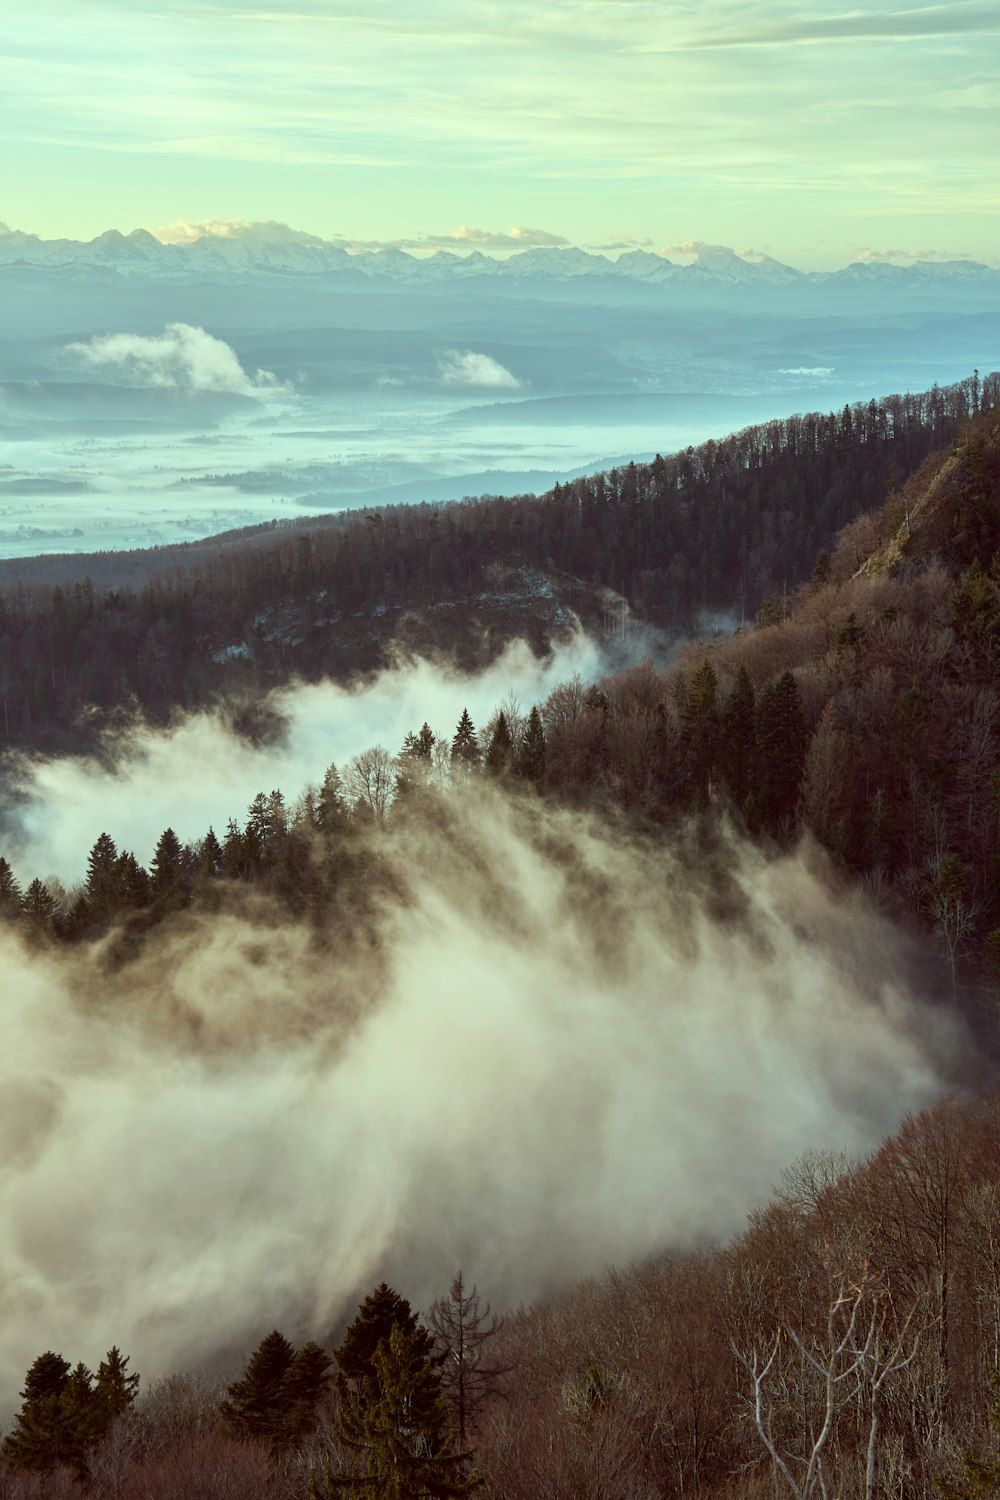 a view of a mountain covered in fog